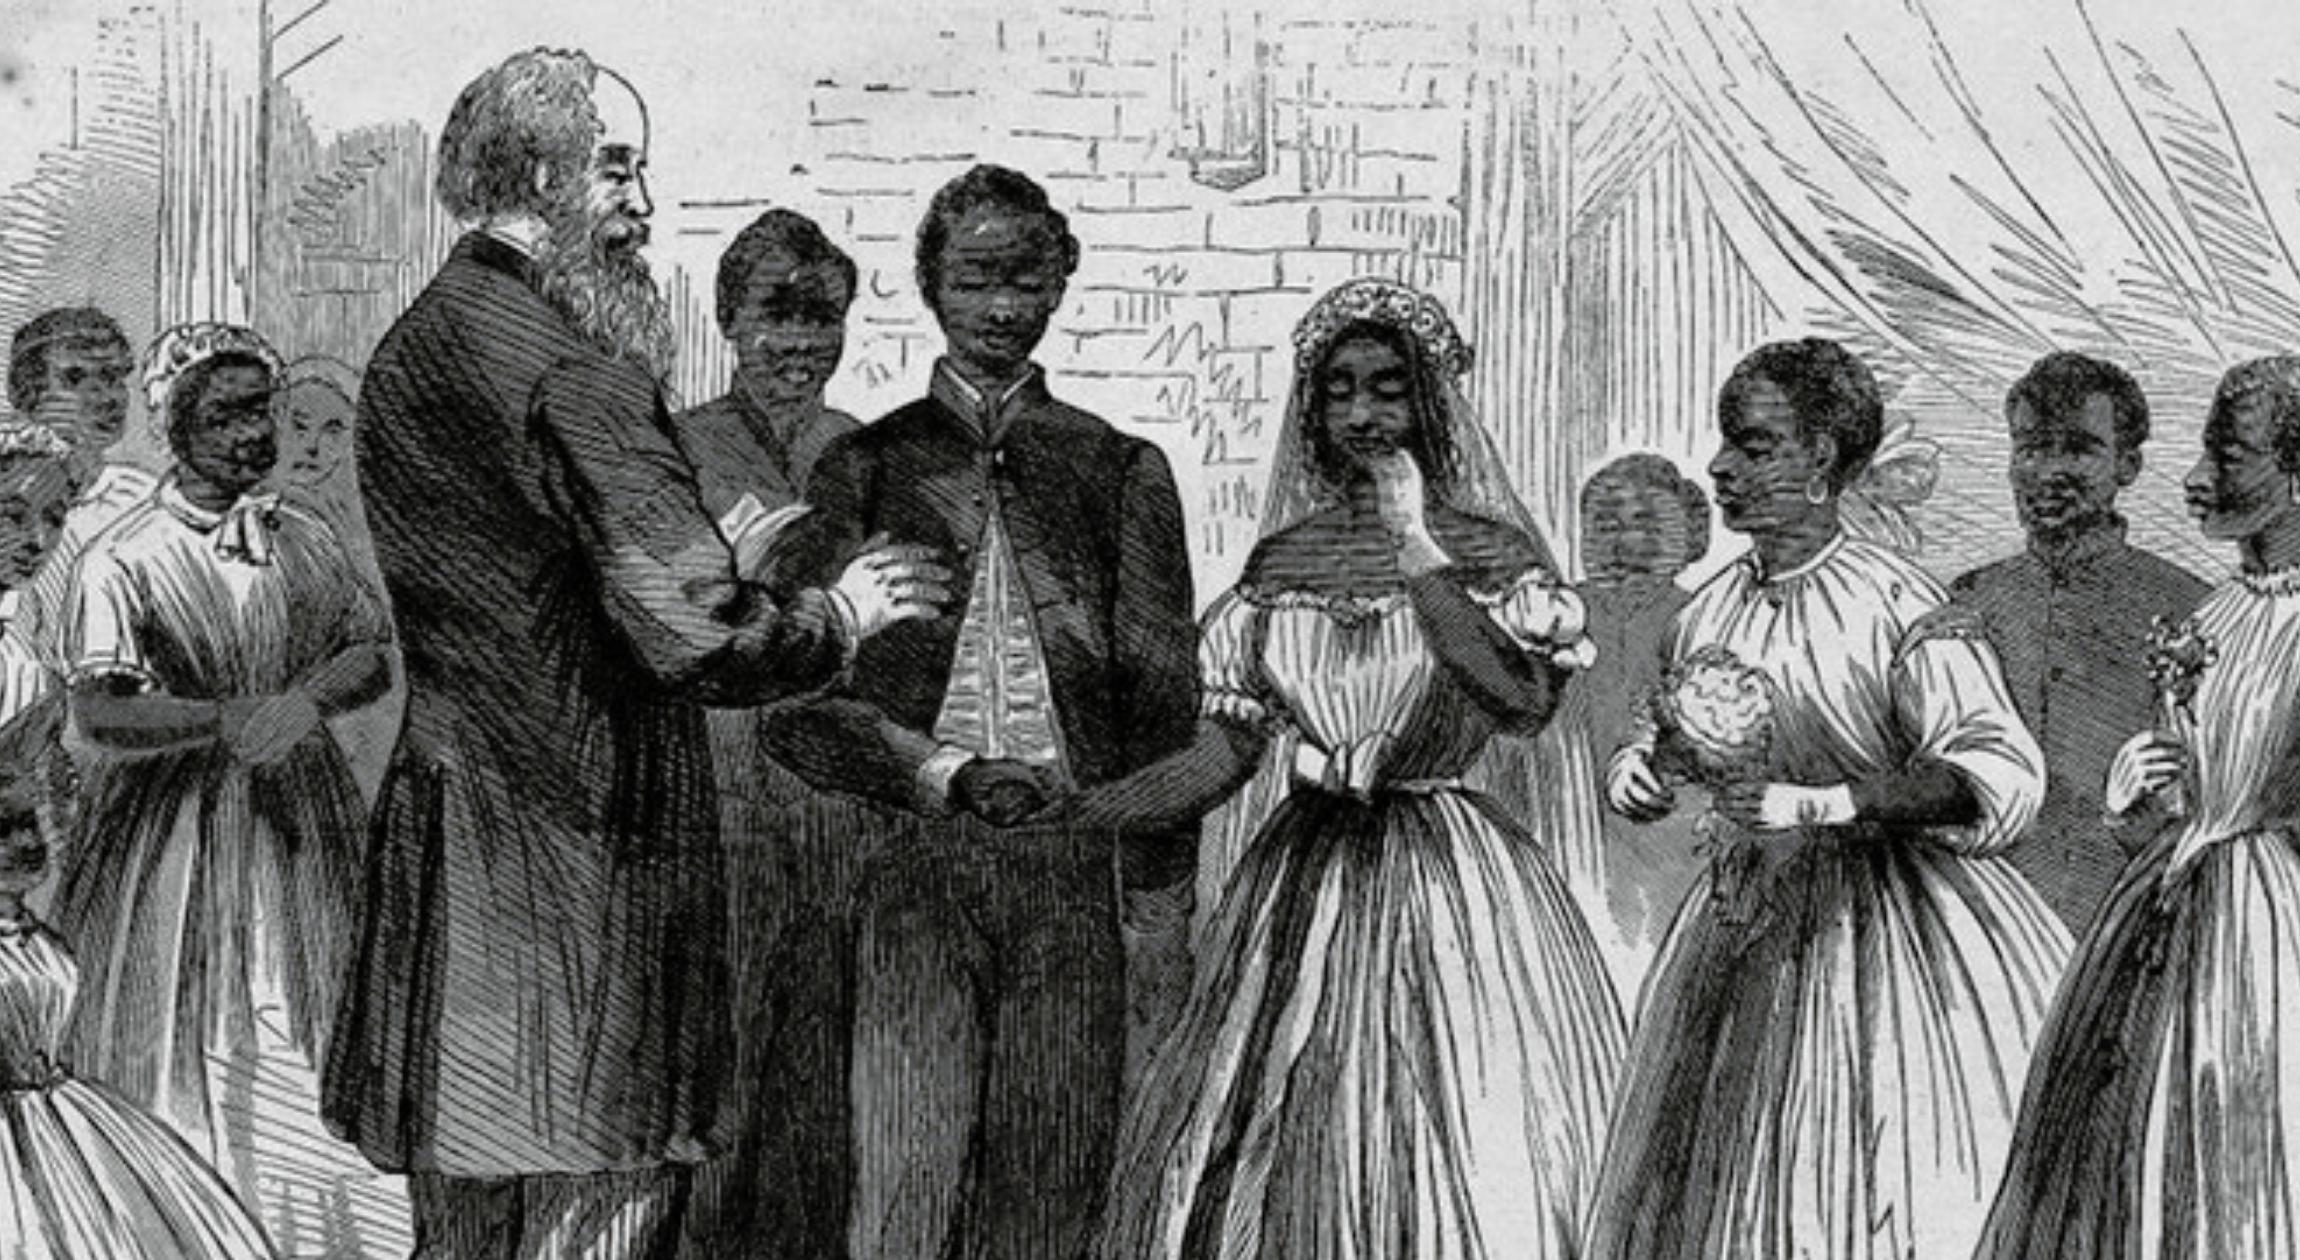 An illustration of Black people in wedding attire from a historical period of time